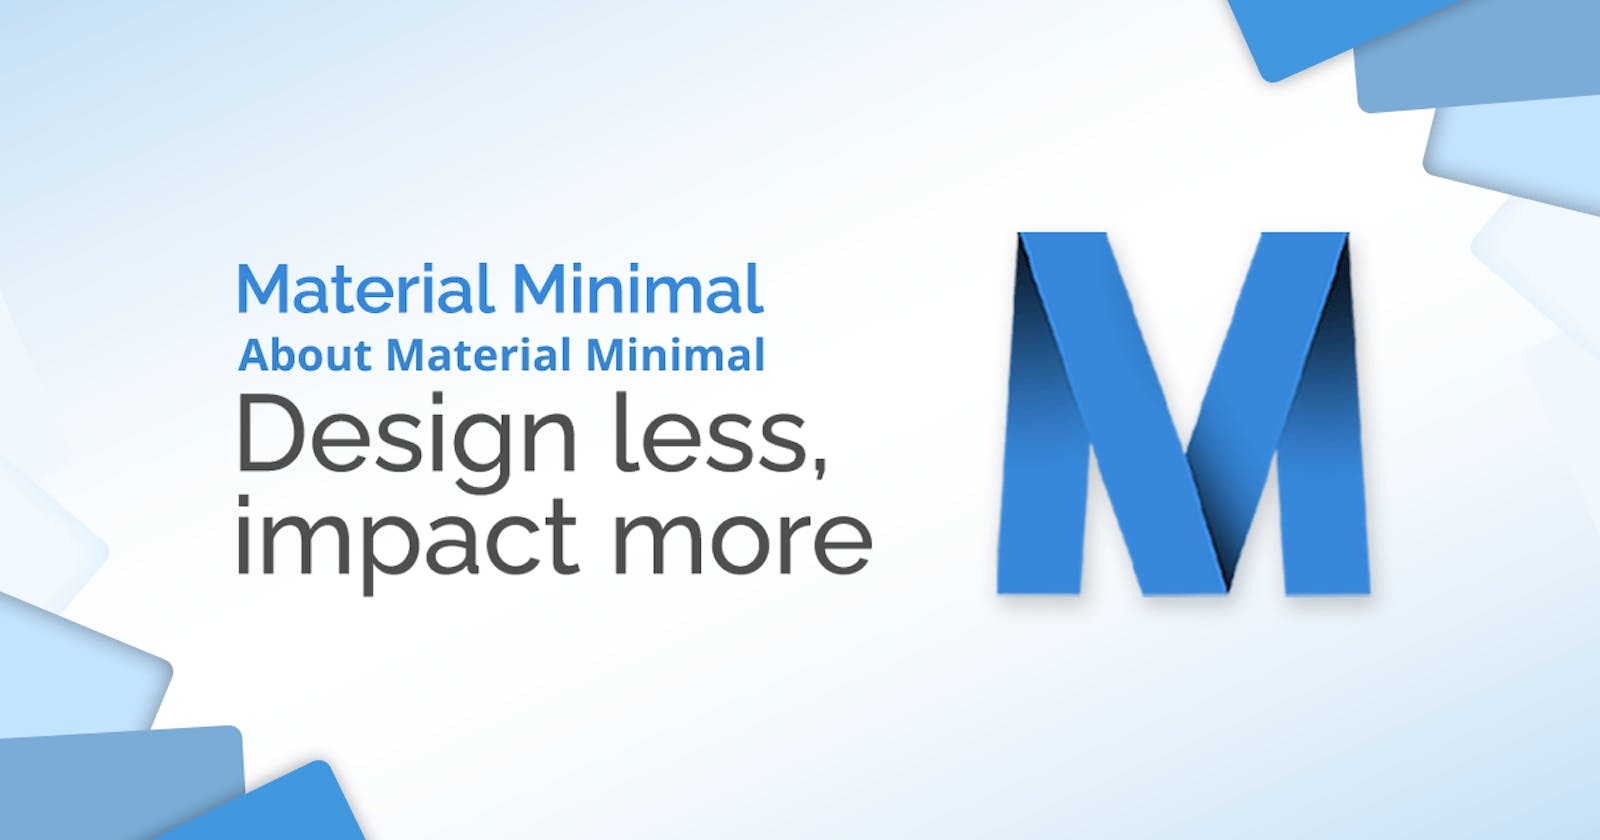 WebDesign Tutorial - About Material Minimal